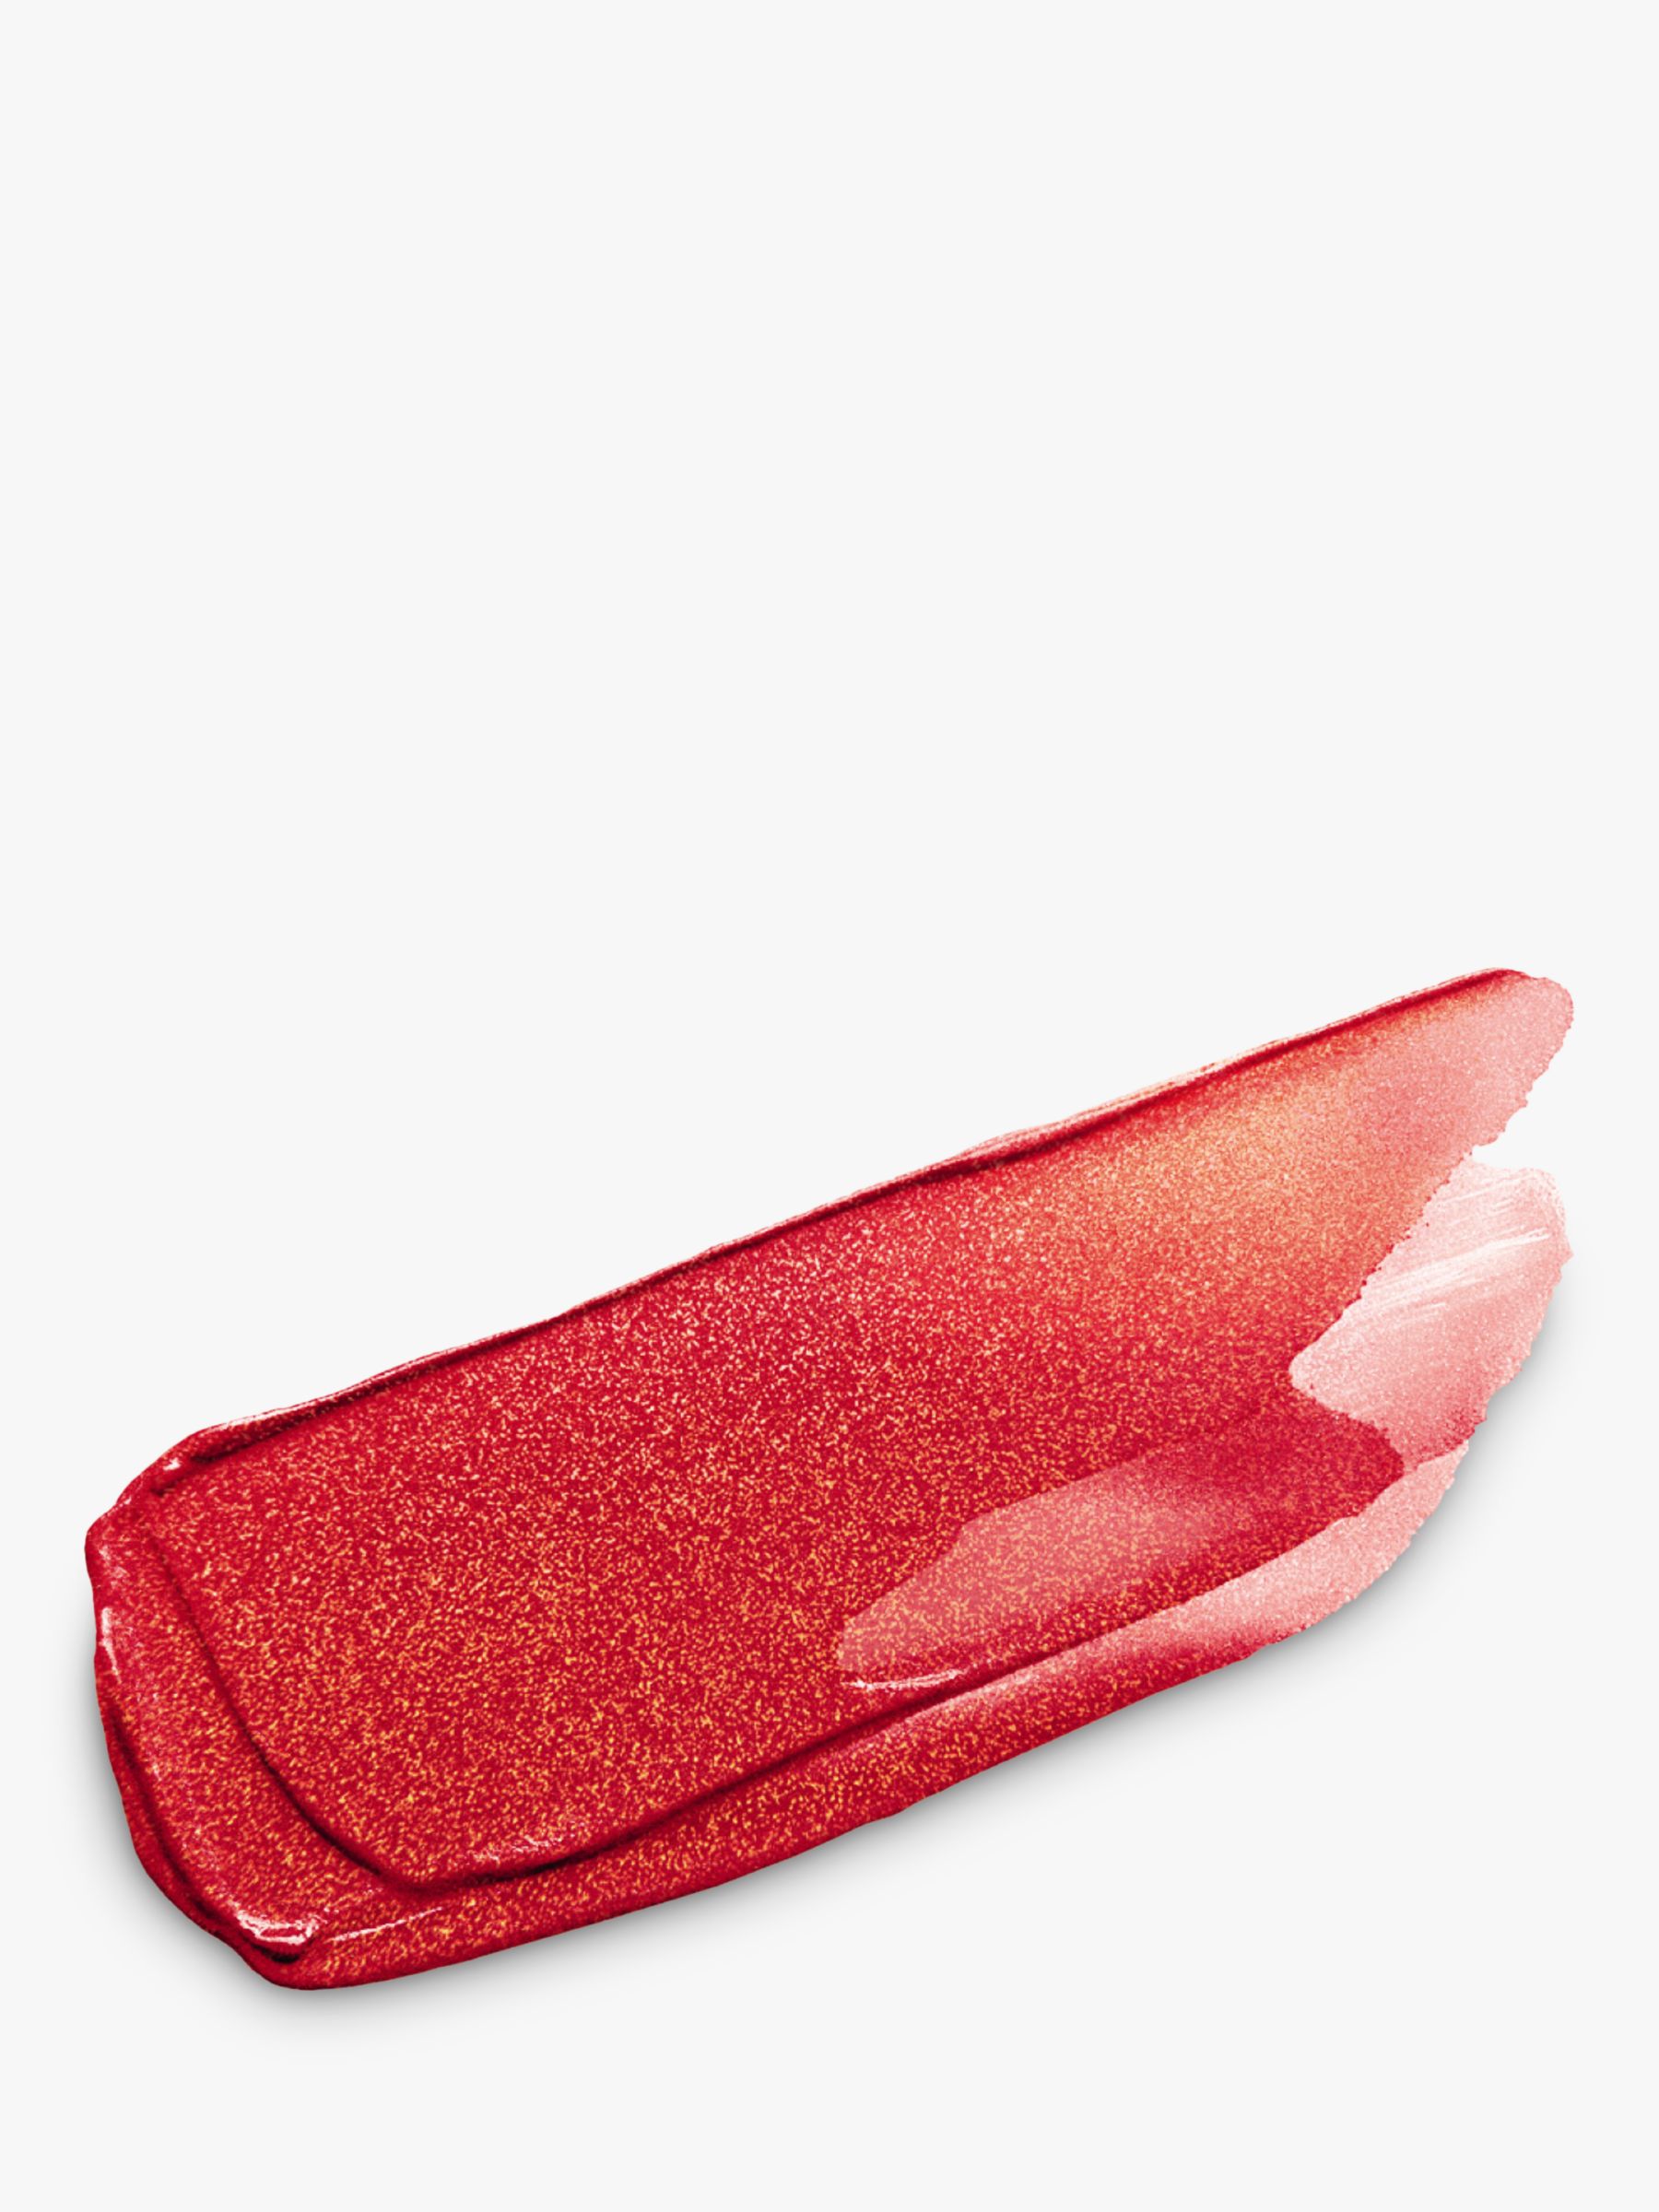 Givenchy Le Rouge Lipstick Lunar New Year Marble Edition, N888